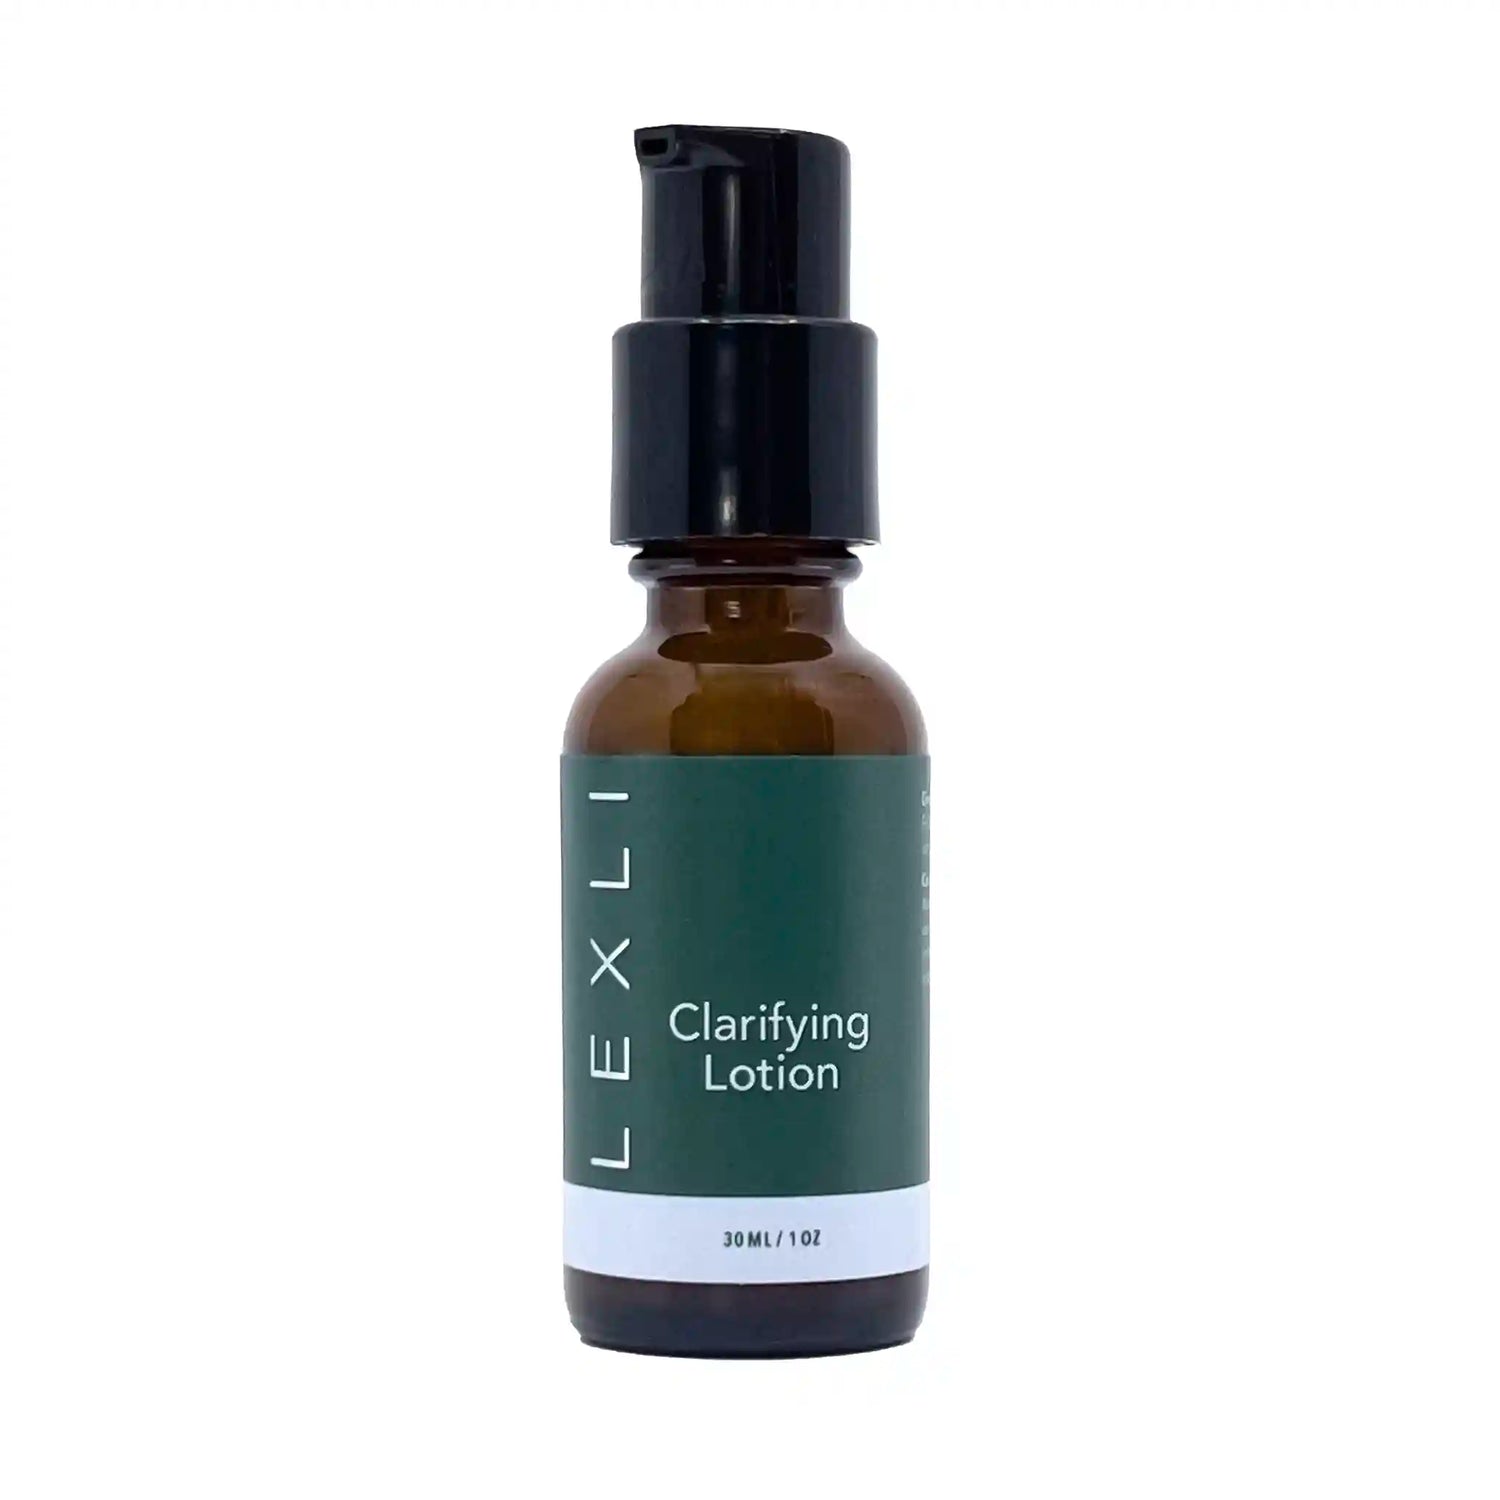 1 oz bottle with green label, Clarifying Lotion 